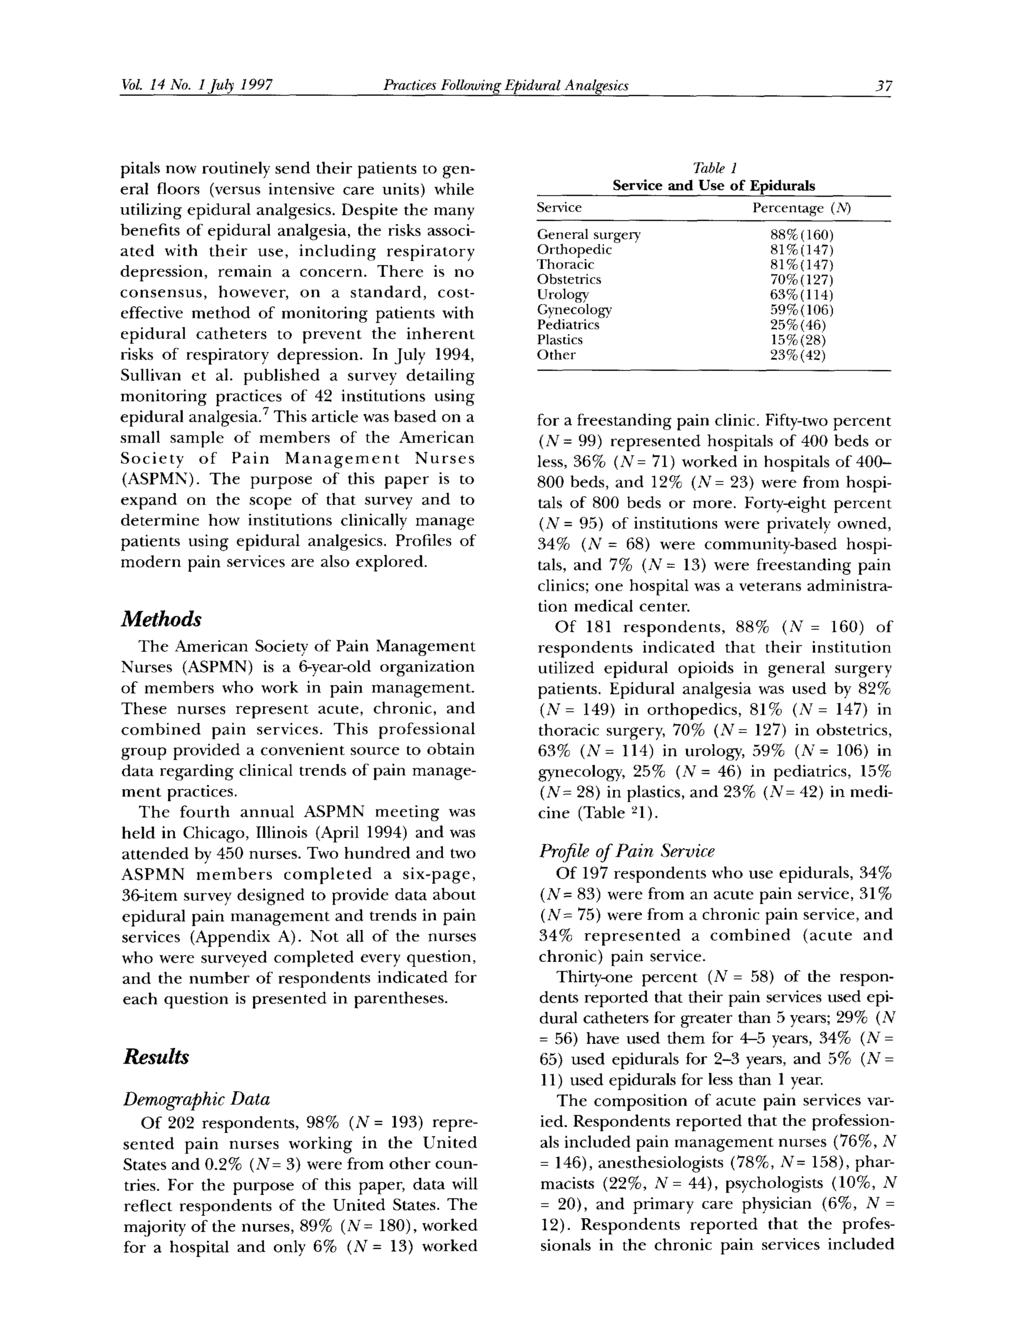 Vol. 14 No. 1 July 1997 Practices Following Epidural Analgesics 37 pitals now routinely send their patients to general floors (versus intensive care units) while utilizing epidural analgesics.